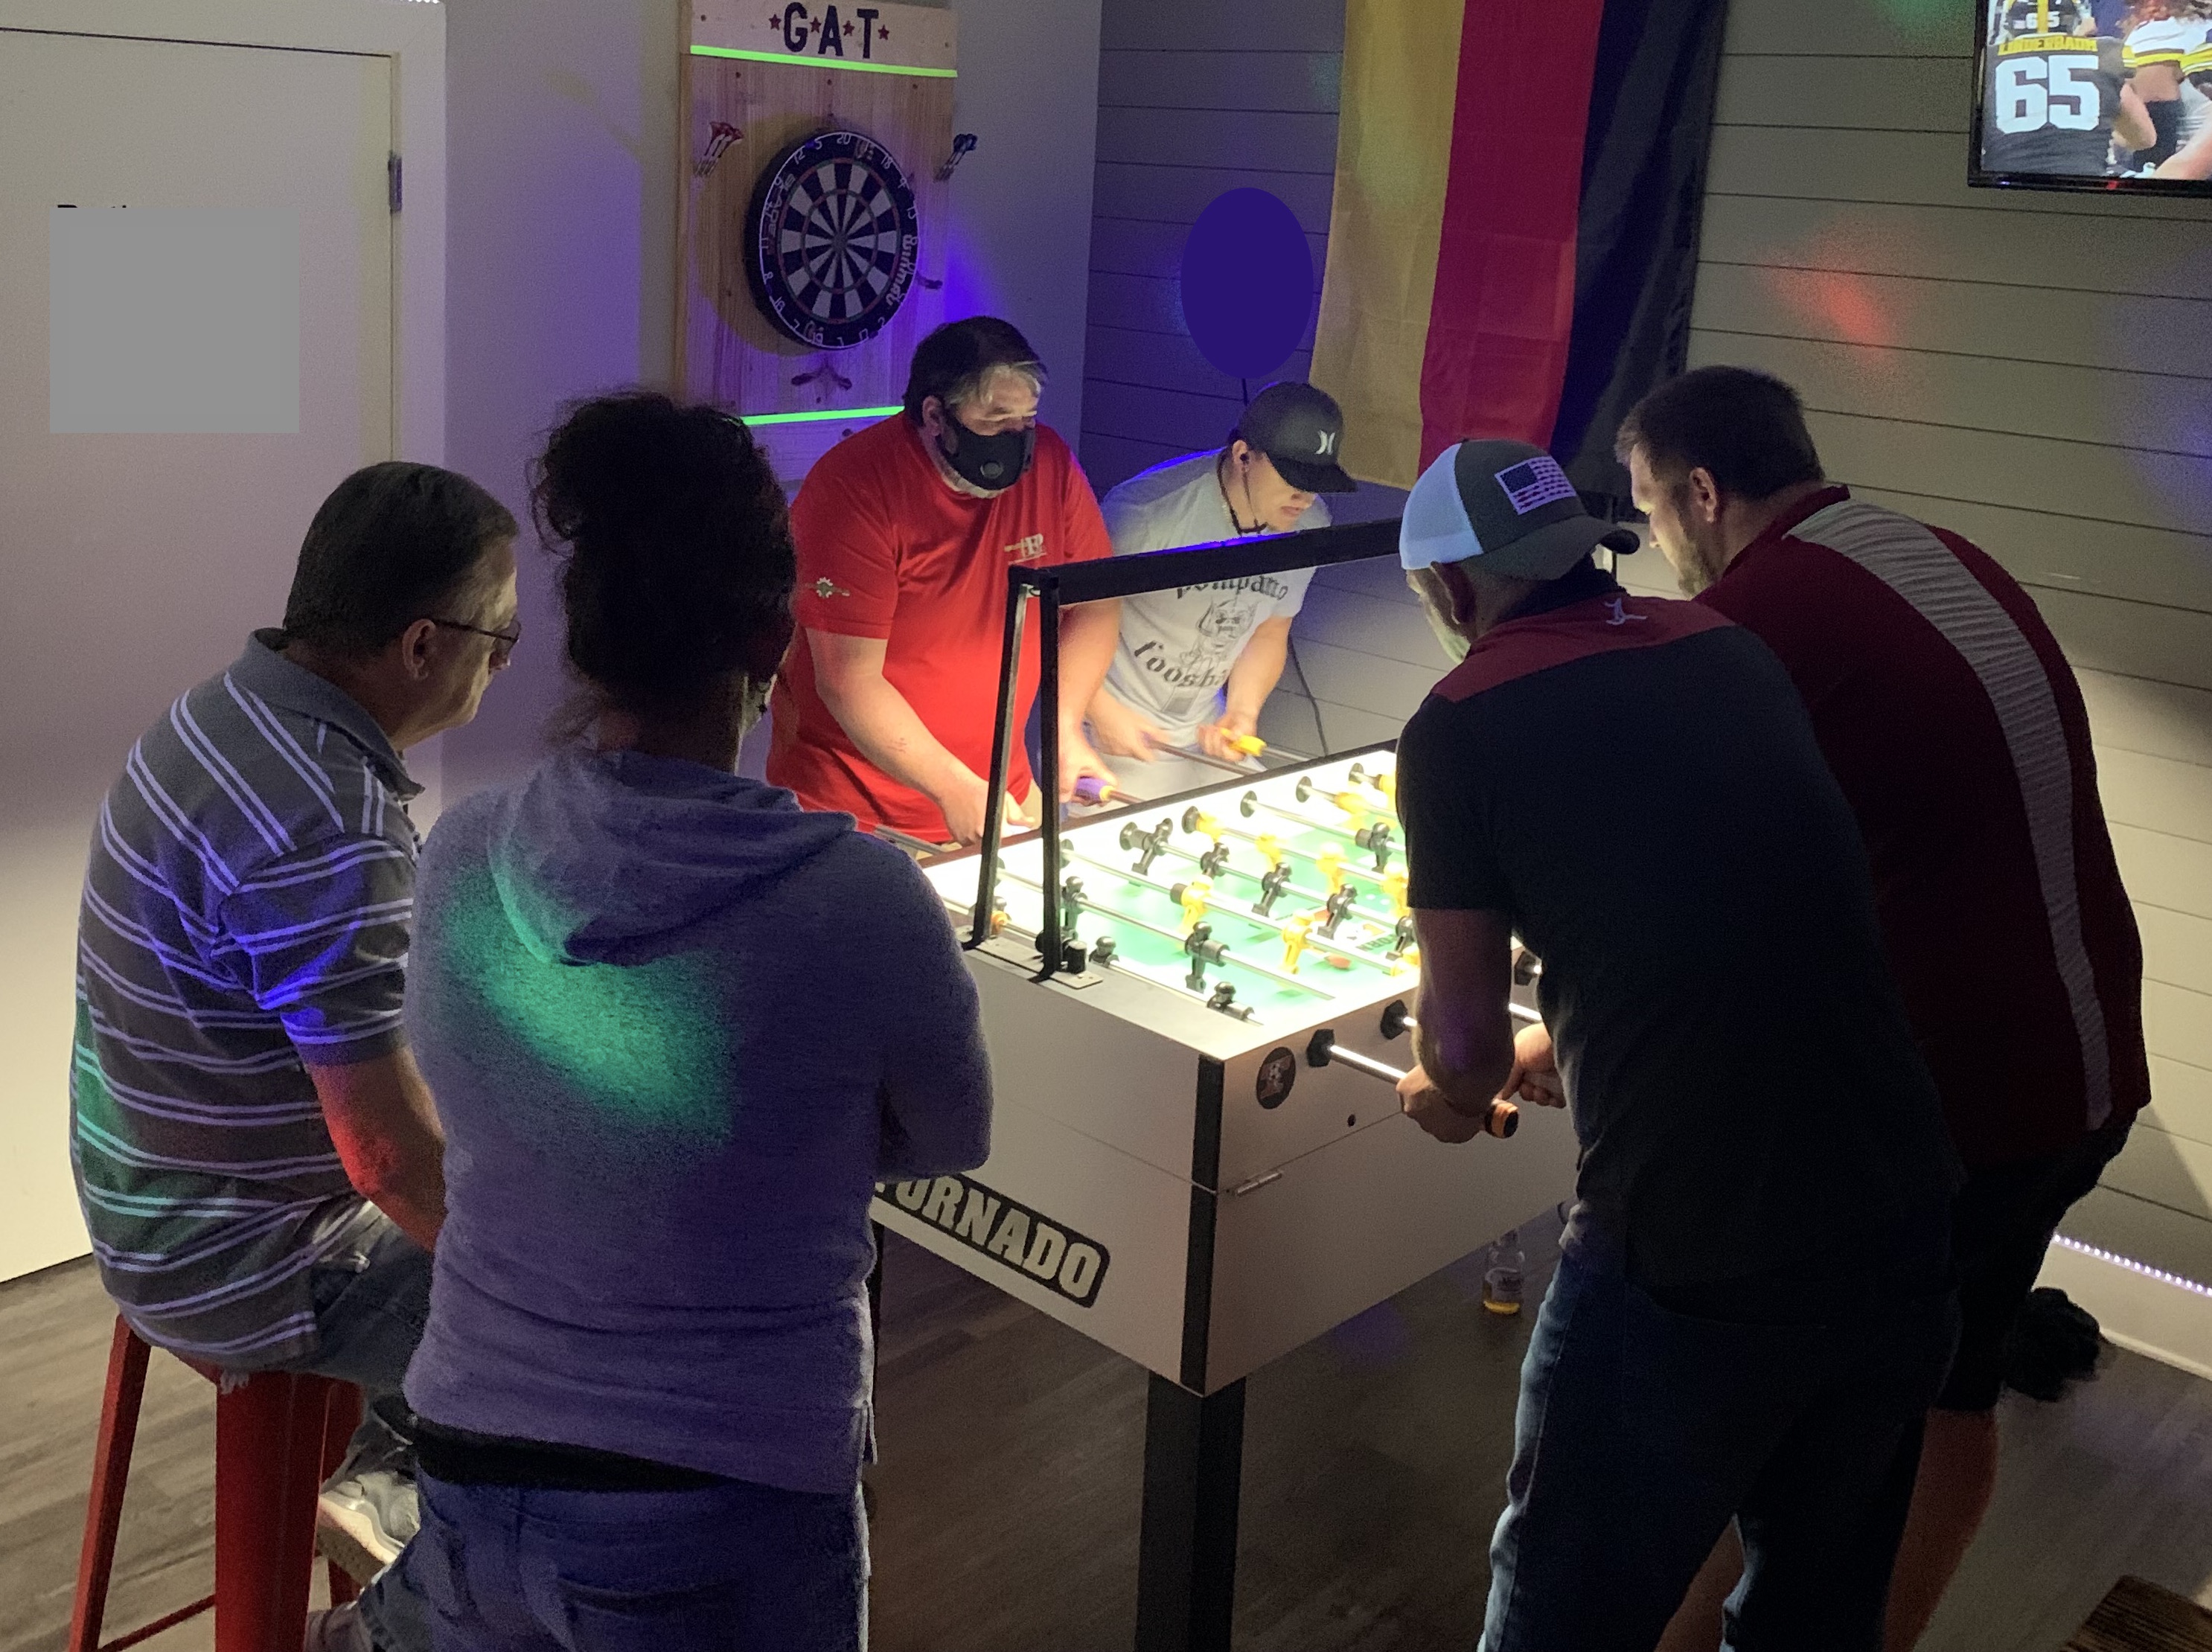 Competition became heated during open doubles foosball action at German Axe Co. in Cullman,AL. with a game-three 4-1 come-from-behind victory for Al Widok & Stephen Darby vs Jeremy Monroe & Nick Peterson in a elimination match of the Cullman FoosBlitz.